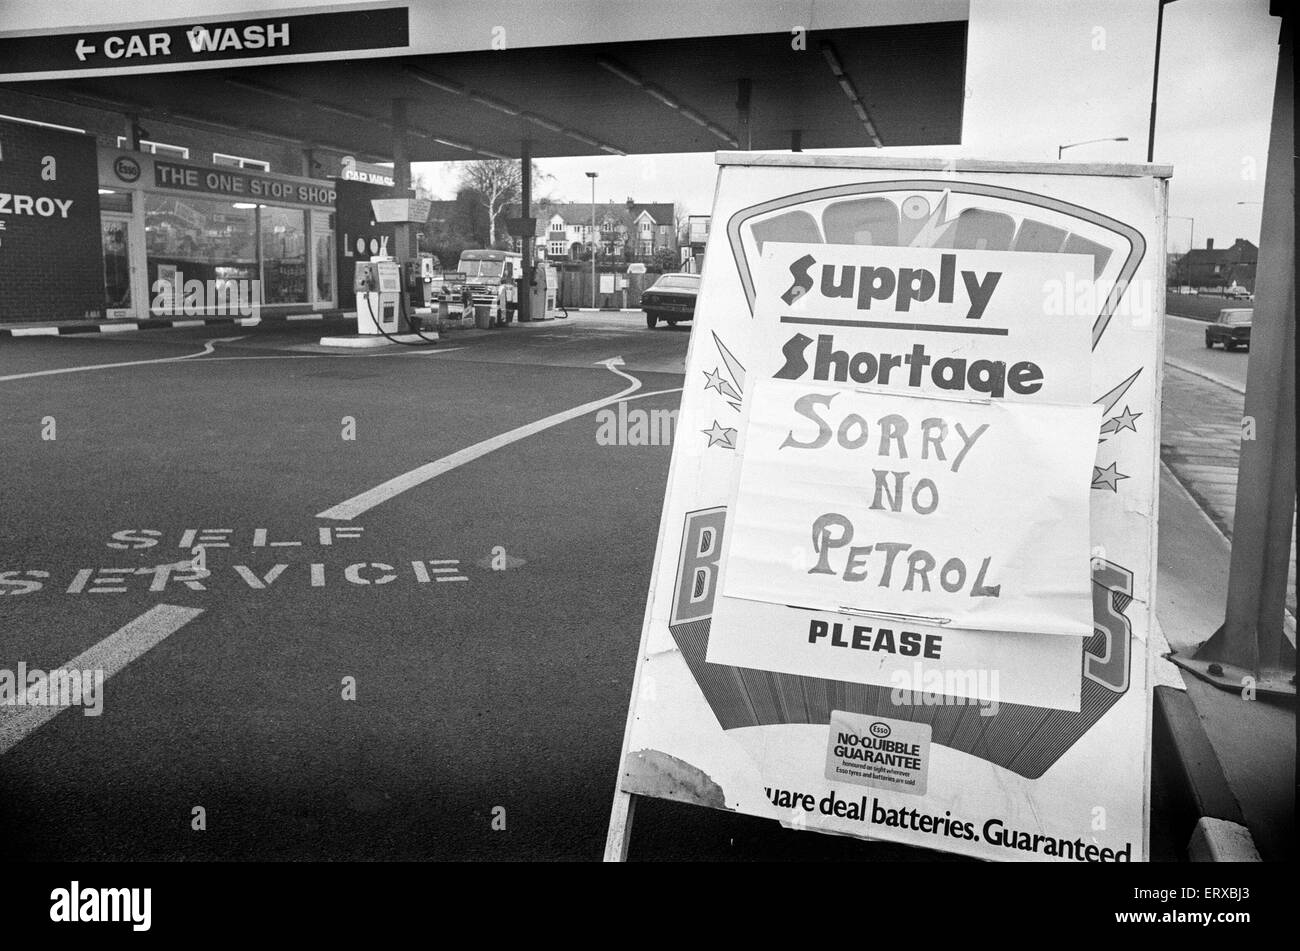 Fuel Shortages and Fuel Rationing Signs, Bearwood, Birmingham, Tuesday 4th December 1973. Supply Shortage. Sorry No Petrol. Stock Photo